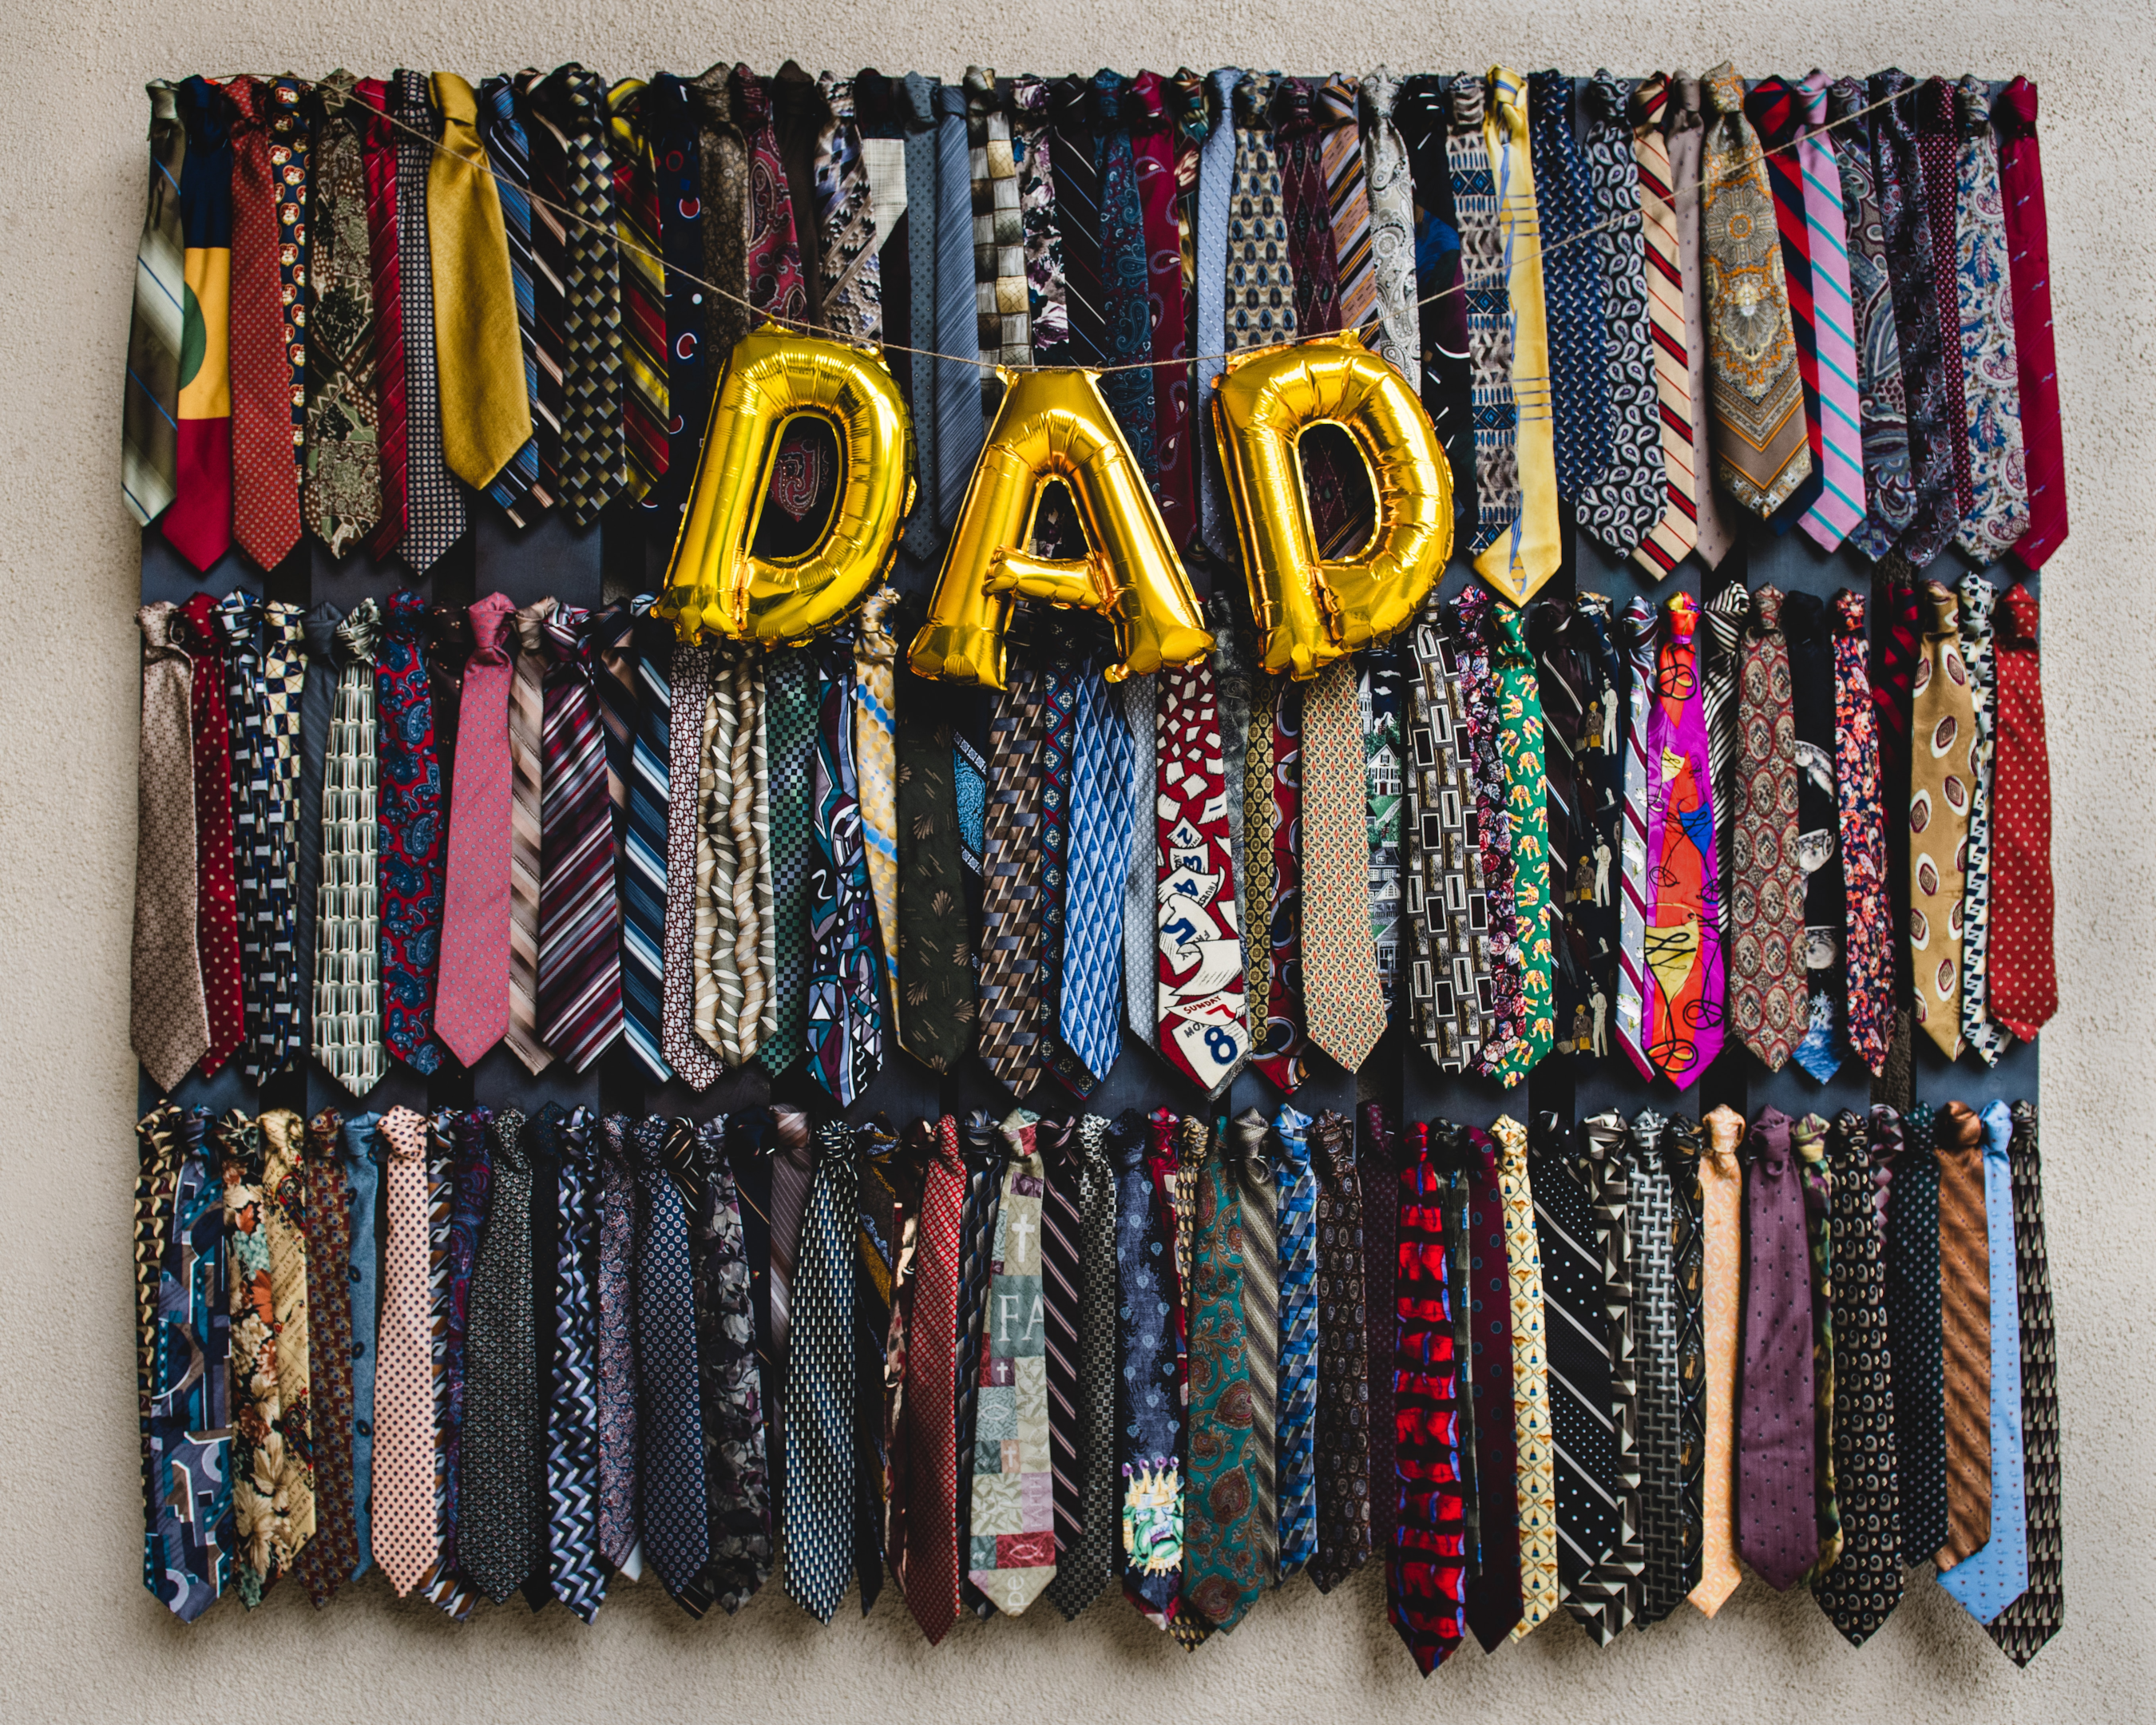 An ugly tie competition is a great Father's Day idea